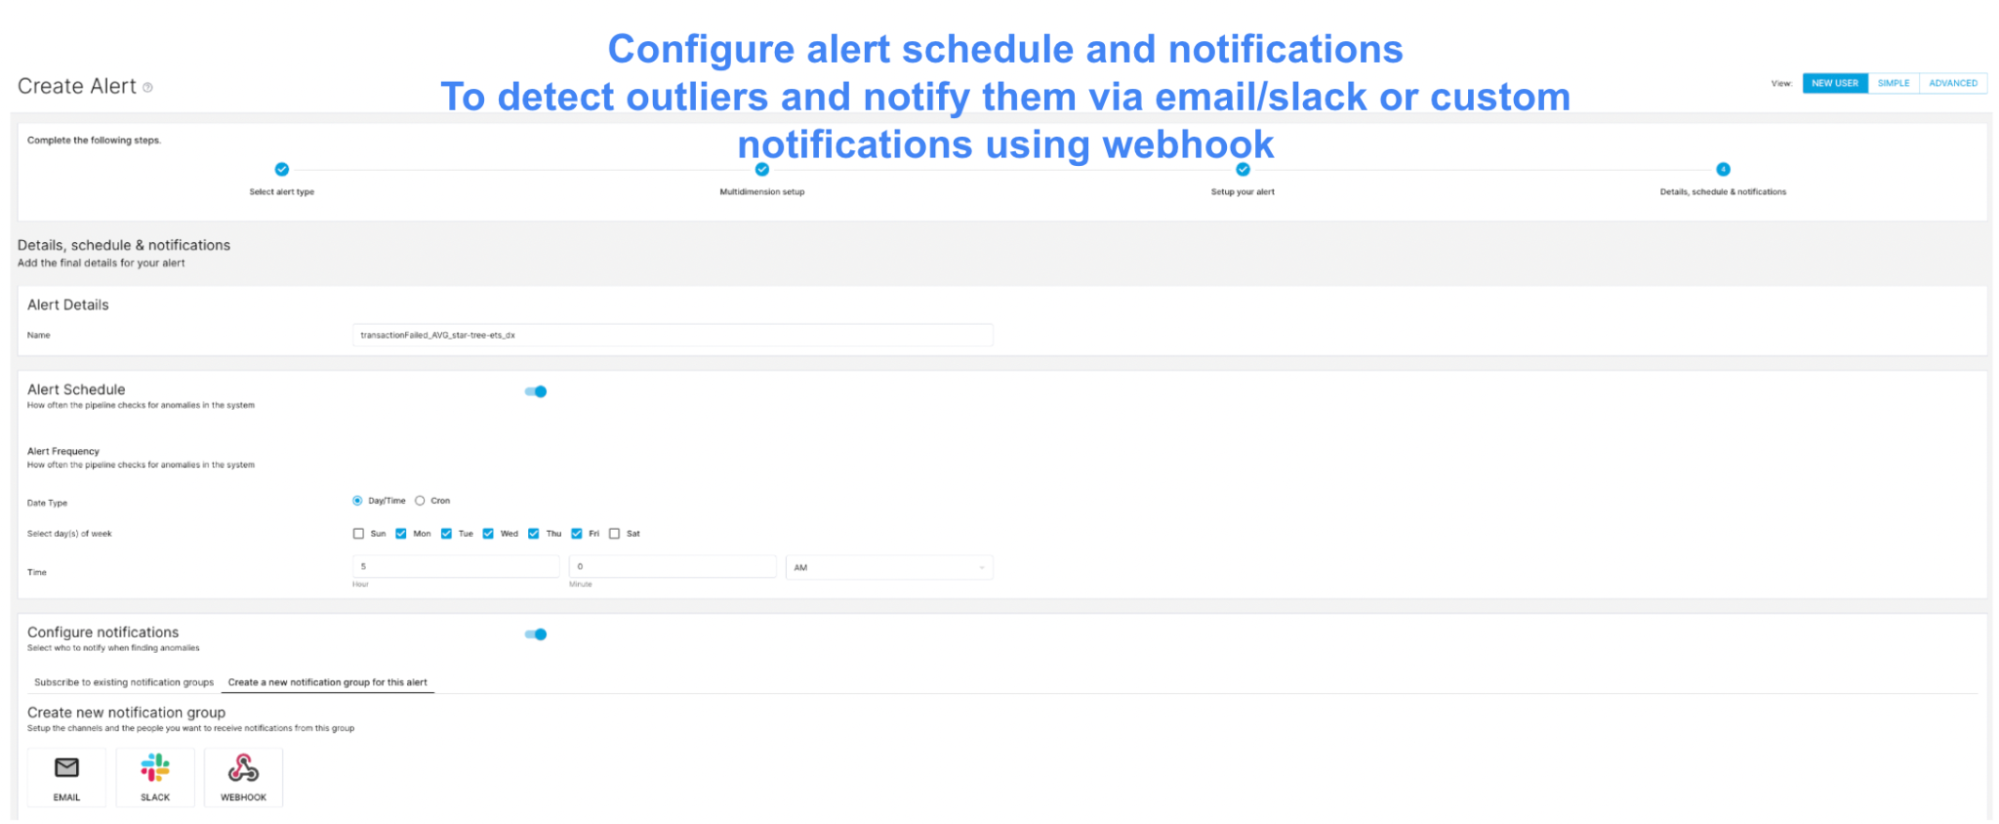 How to configure outlier alert schedule and notifications for email and Slack